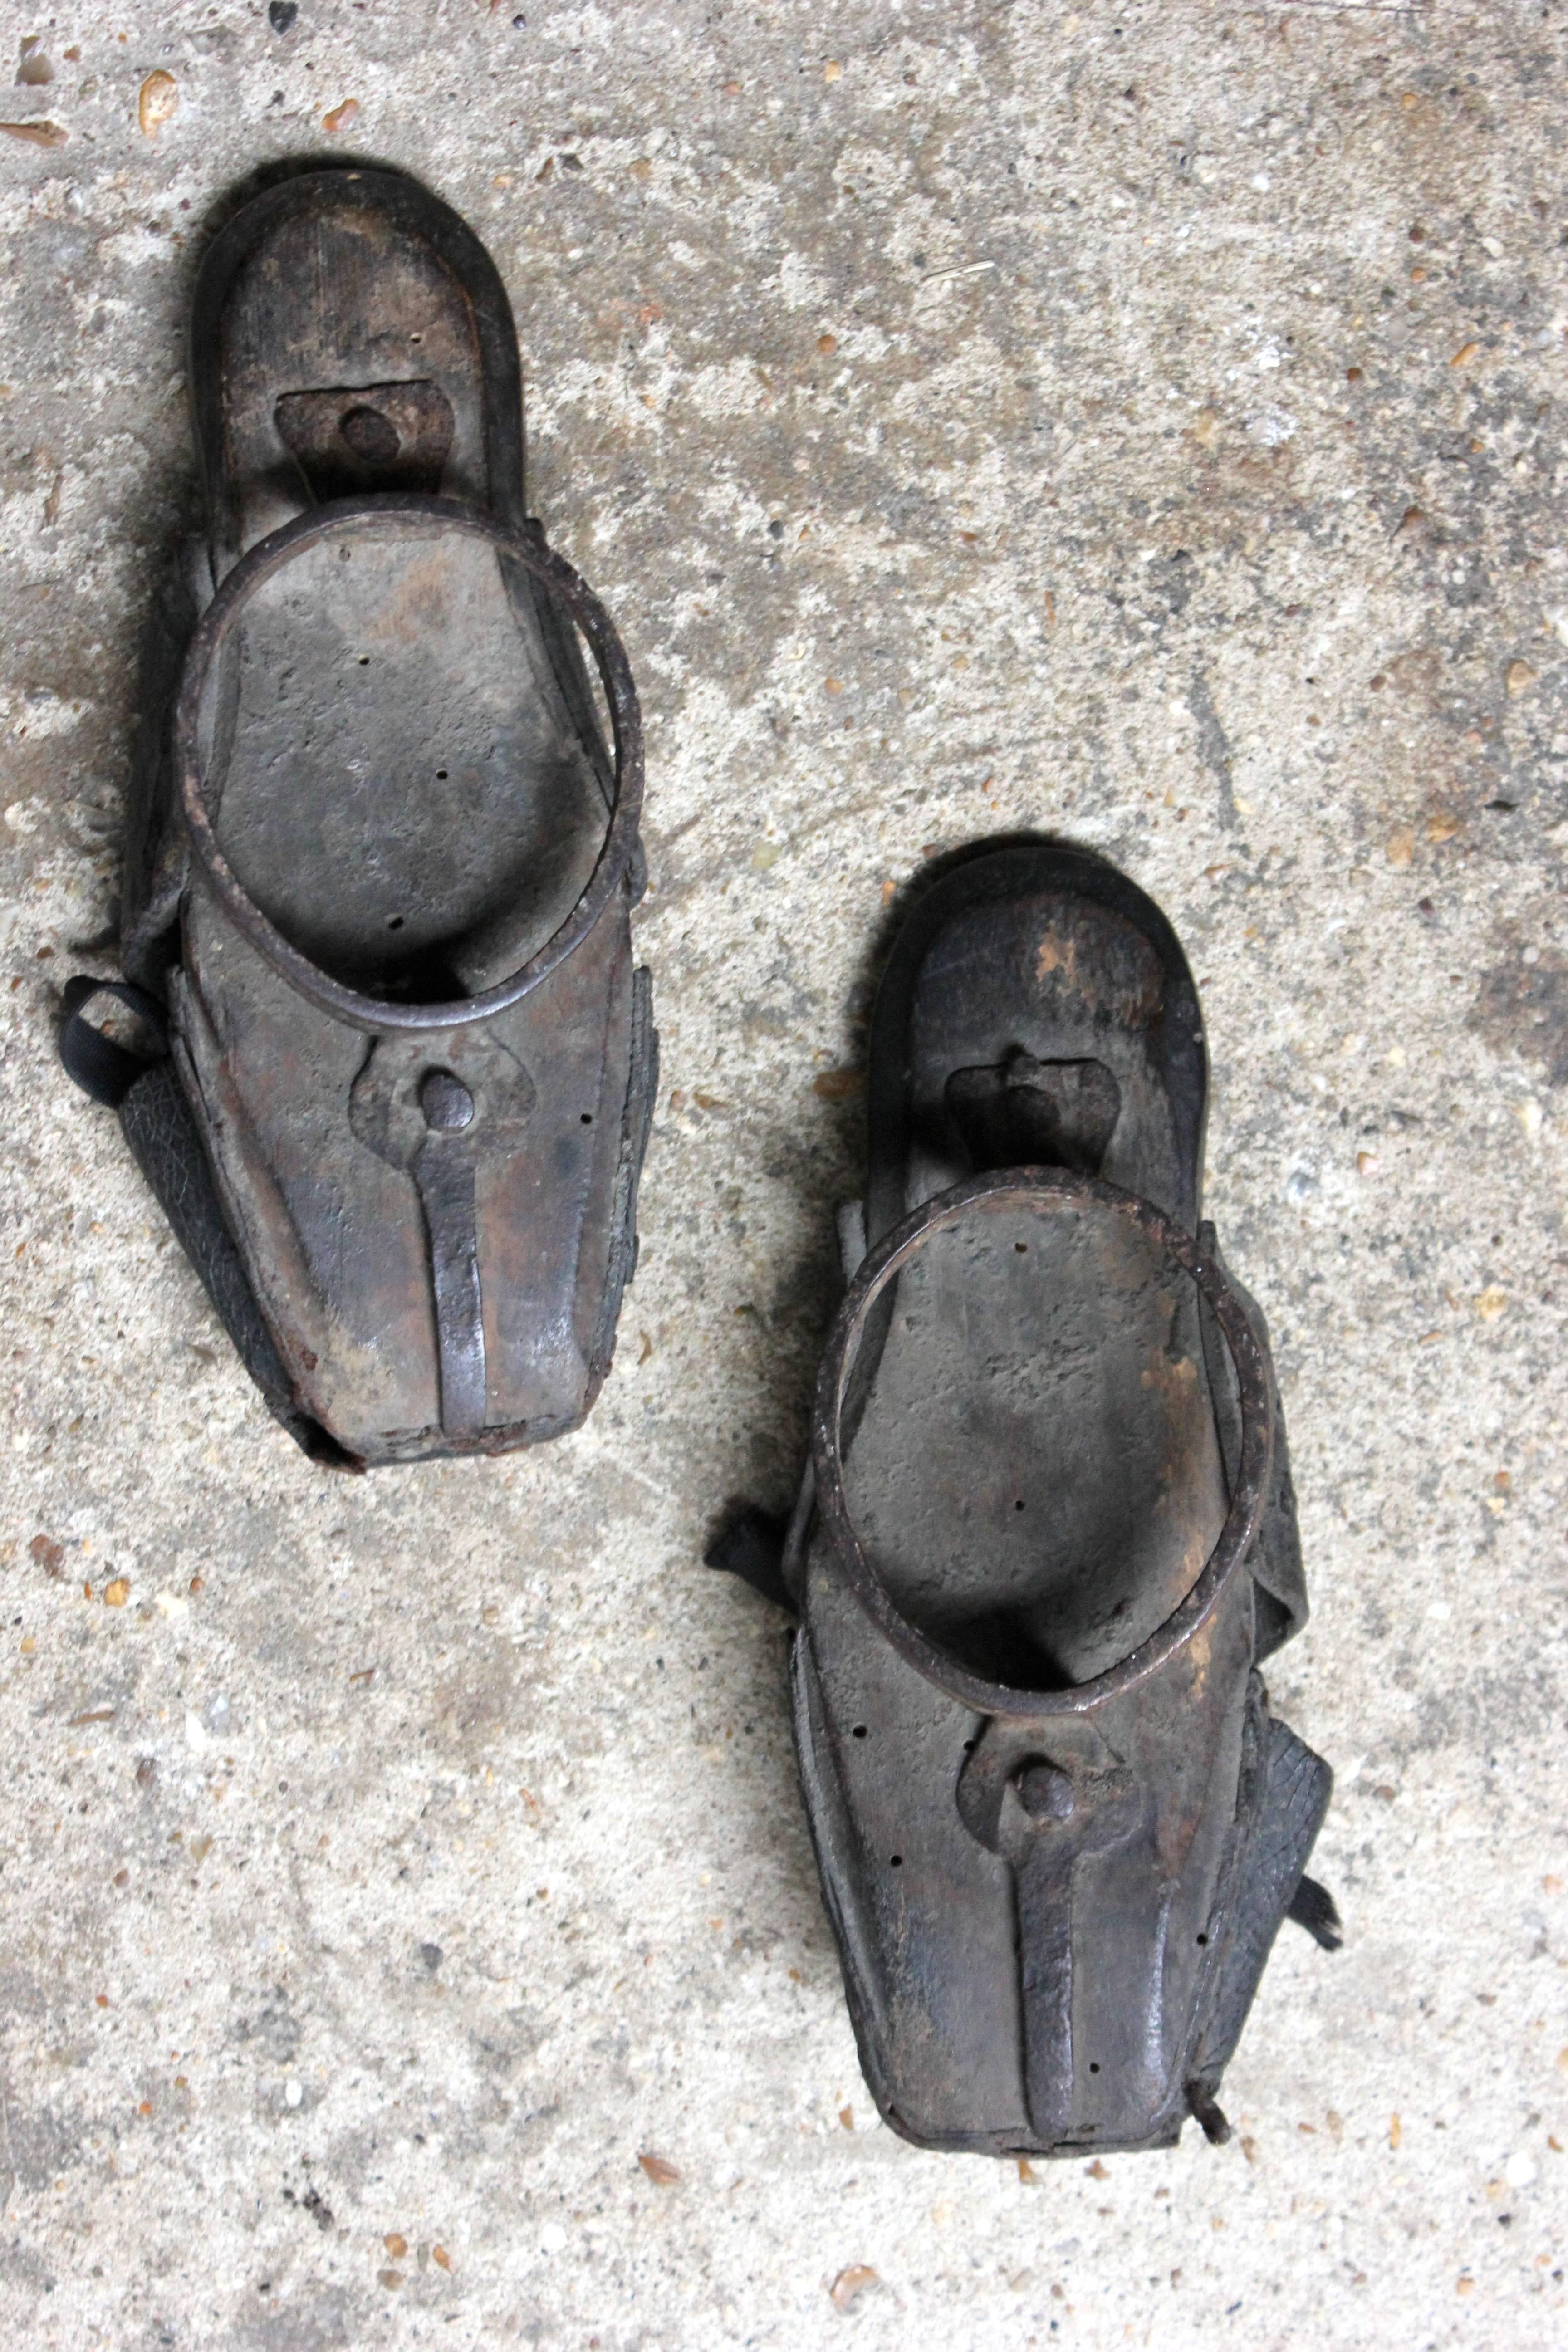 The rare pair of late 17th-early 18th century child’s pattens or overshoes, each having a leather quarter, vamp and toe cap embossed with shells and scrolls to carved wooden soles shod with wrought iron rings and strap-work, the pair surviving from